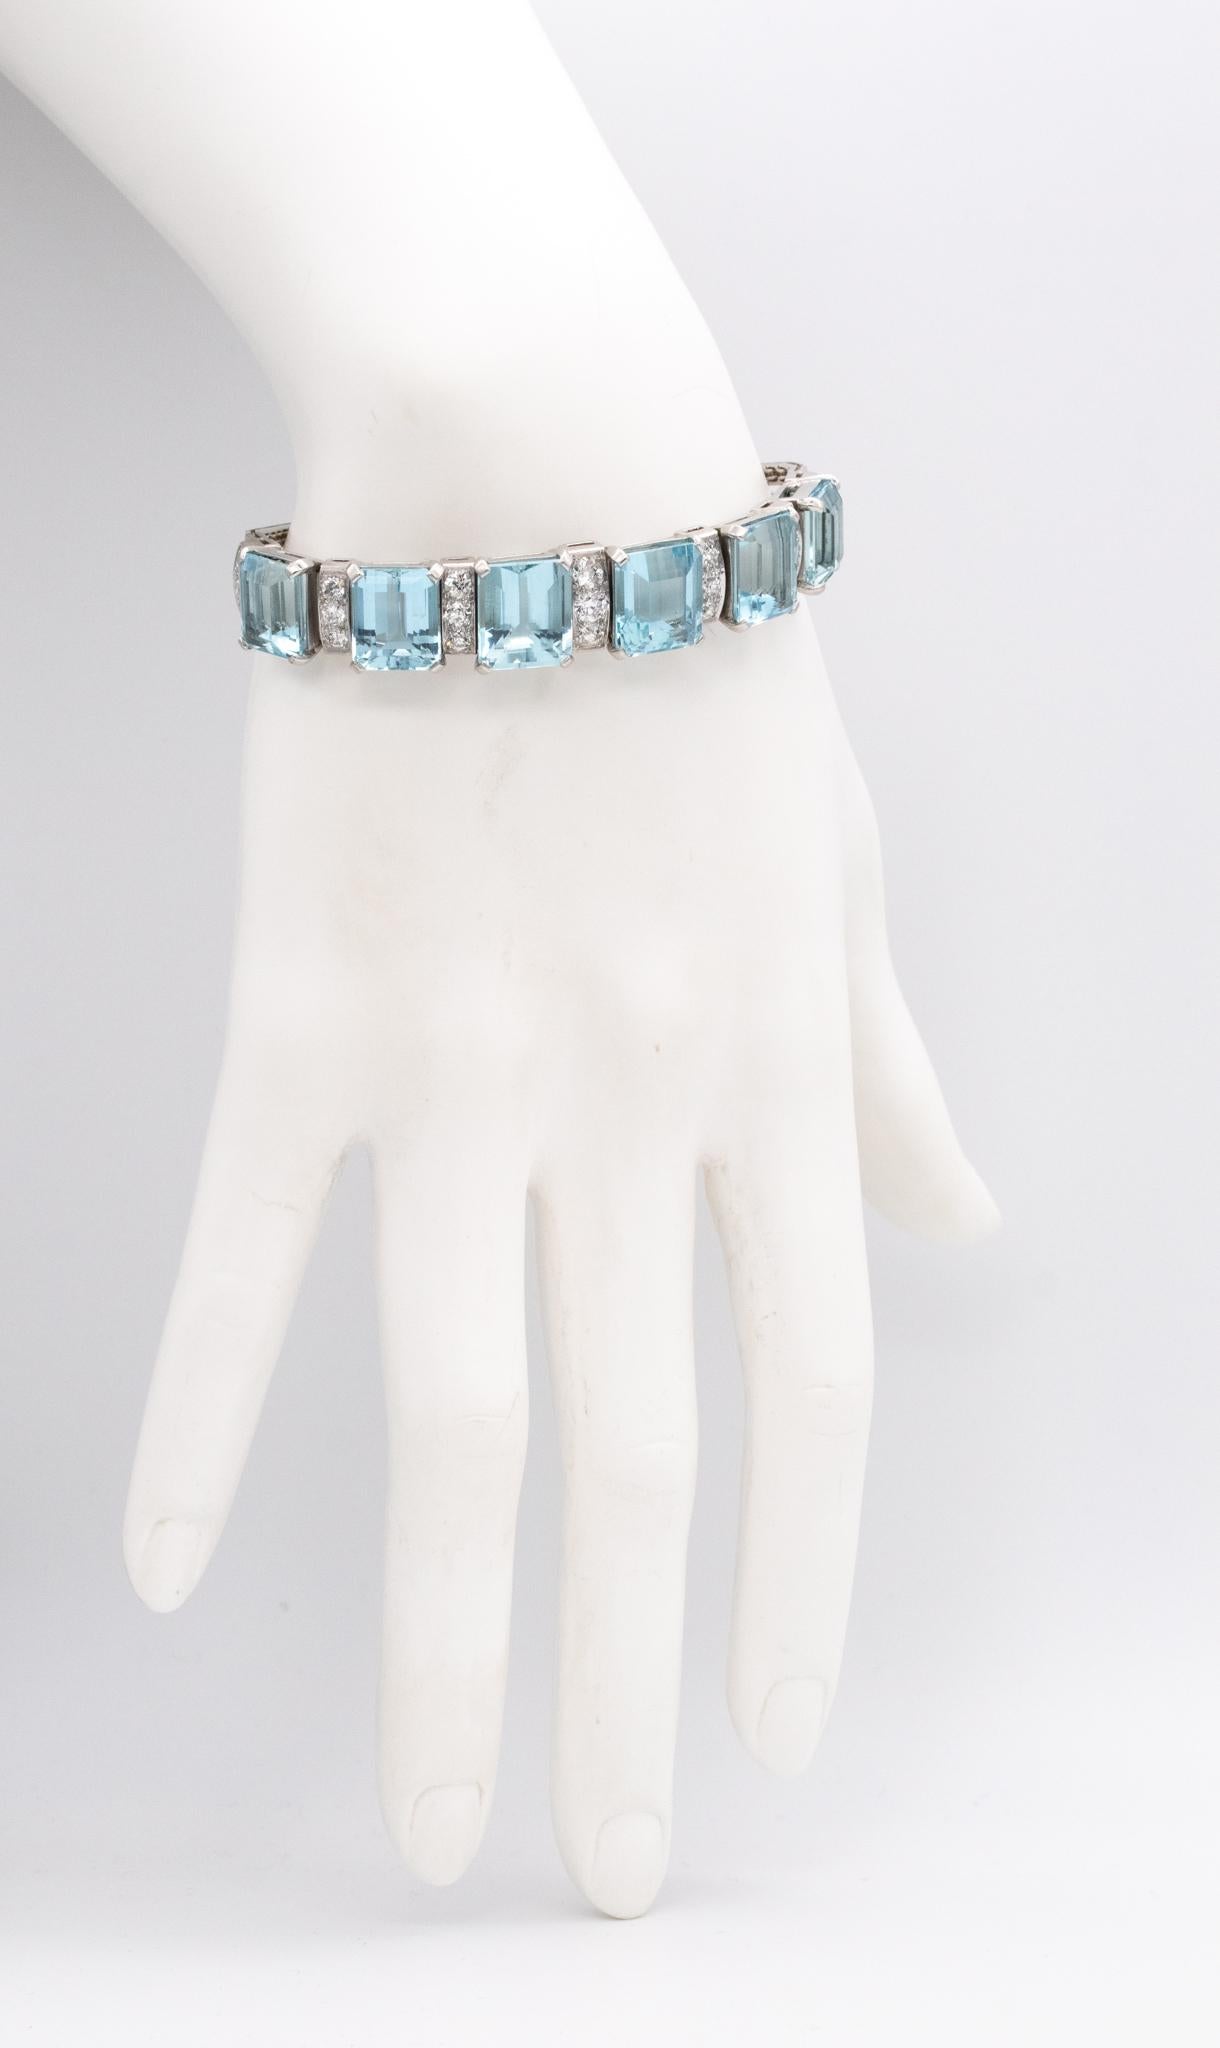 Gorgeous bracelet designed by M. Waslikoff & Sons.

Beautiful piece from the American art-deco period, circa 1940's.This fabulous bracelet was crafted at the atelier of Waslikoff & Sons in New York city. Realized, with impeccable details in solid